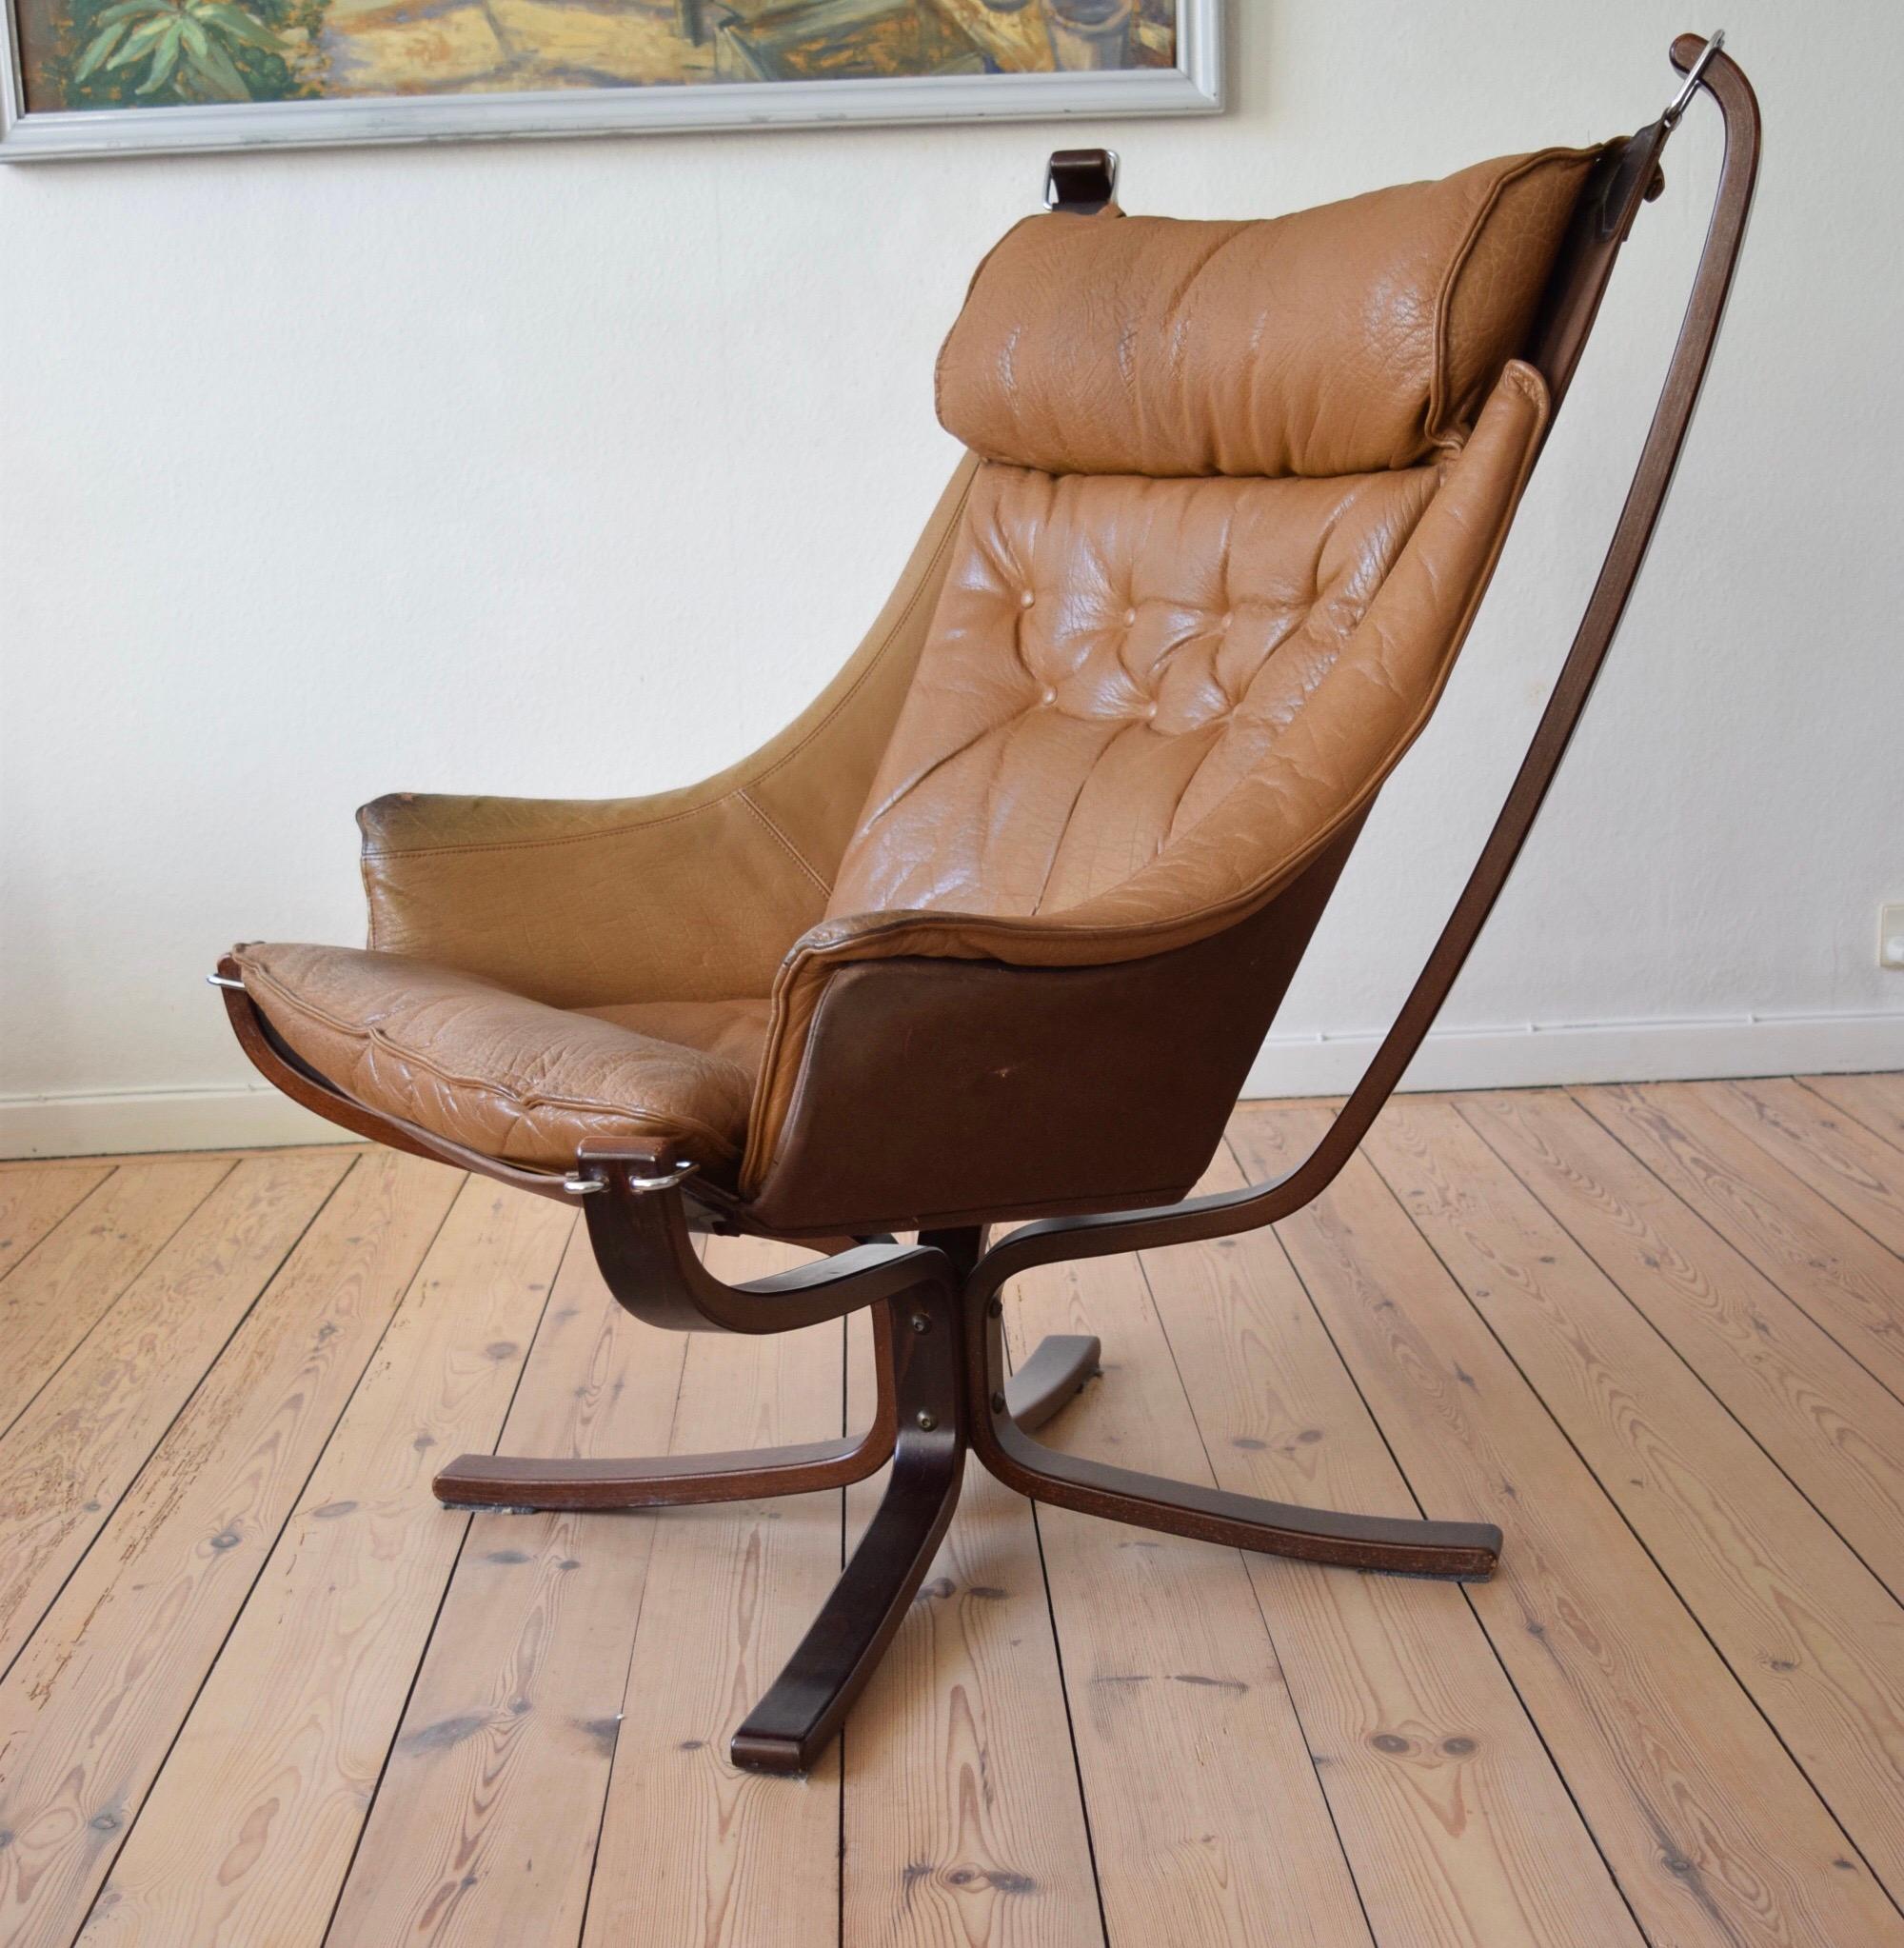 Pair of Midcentury Winged Falcon Chairs, Sigurd Ressel, 1970s For Sale 3